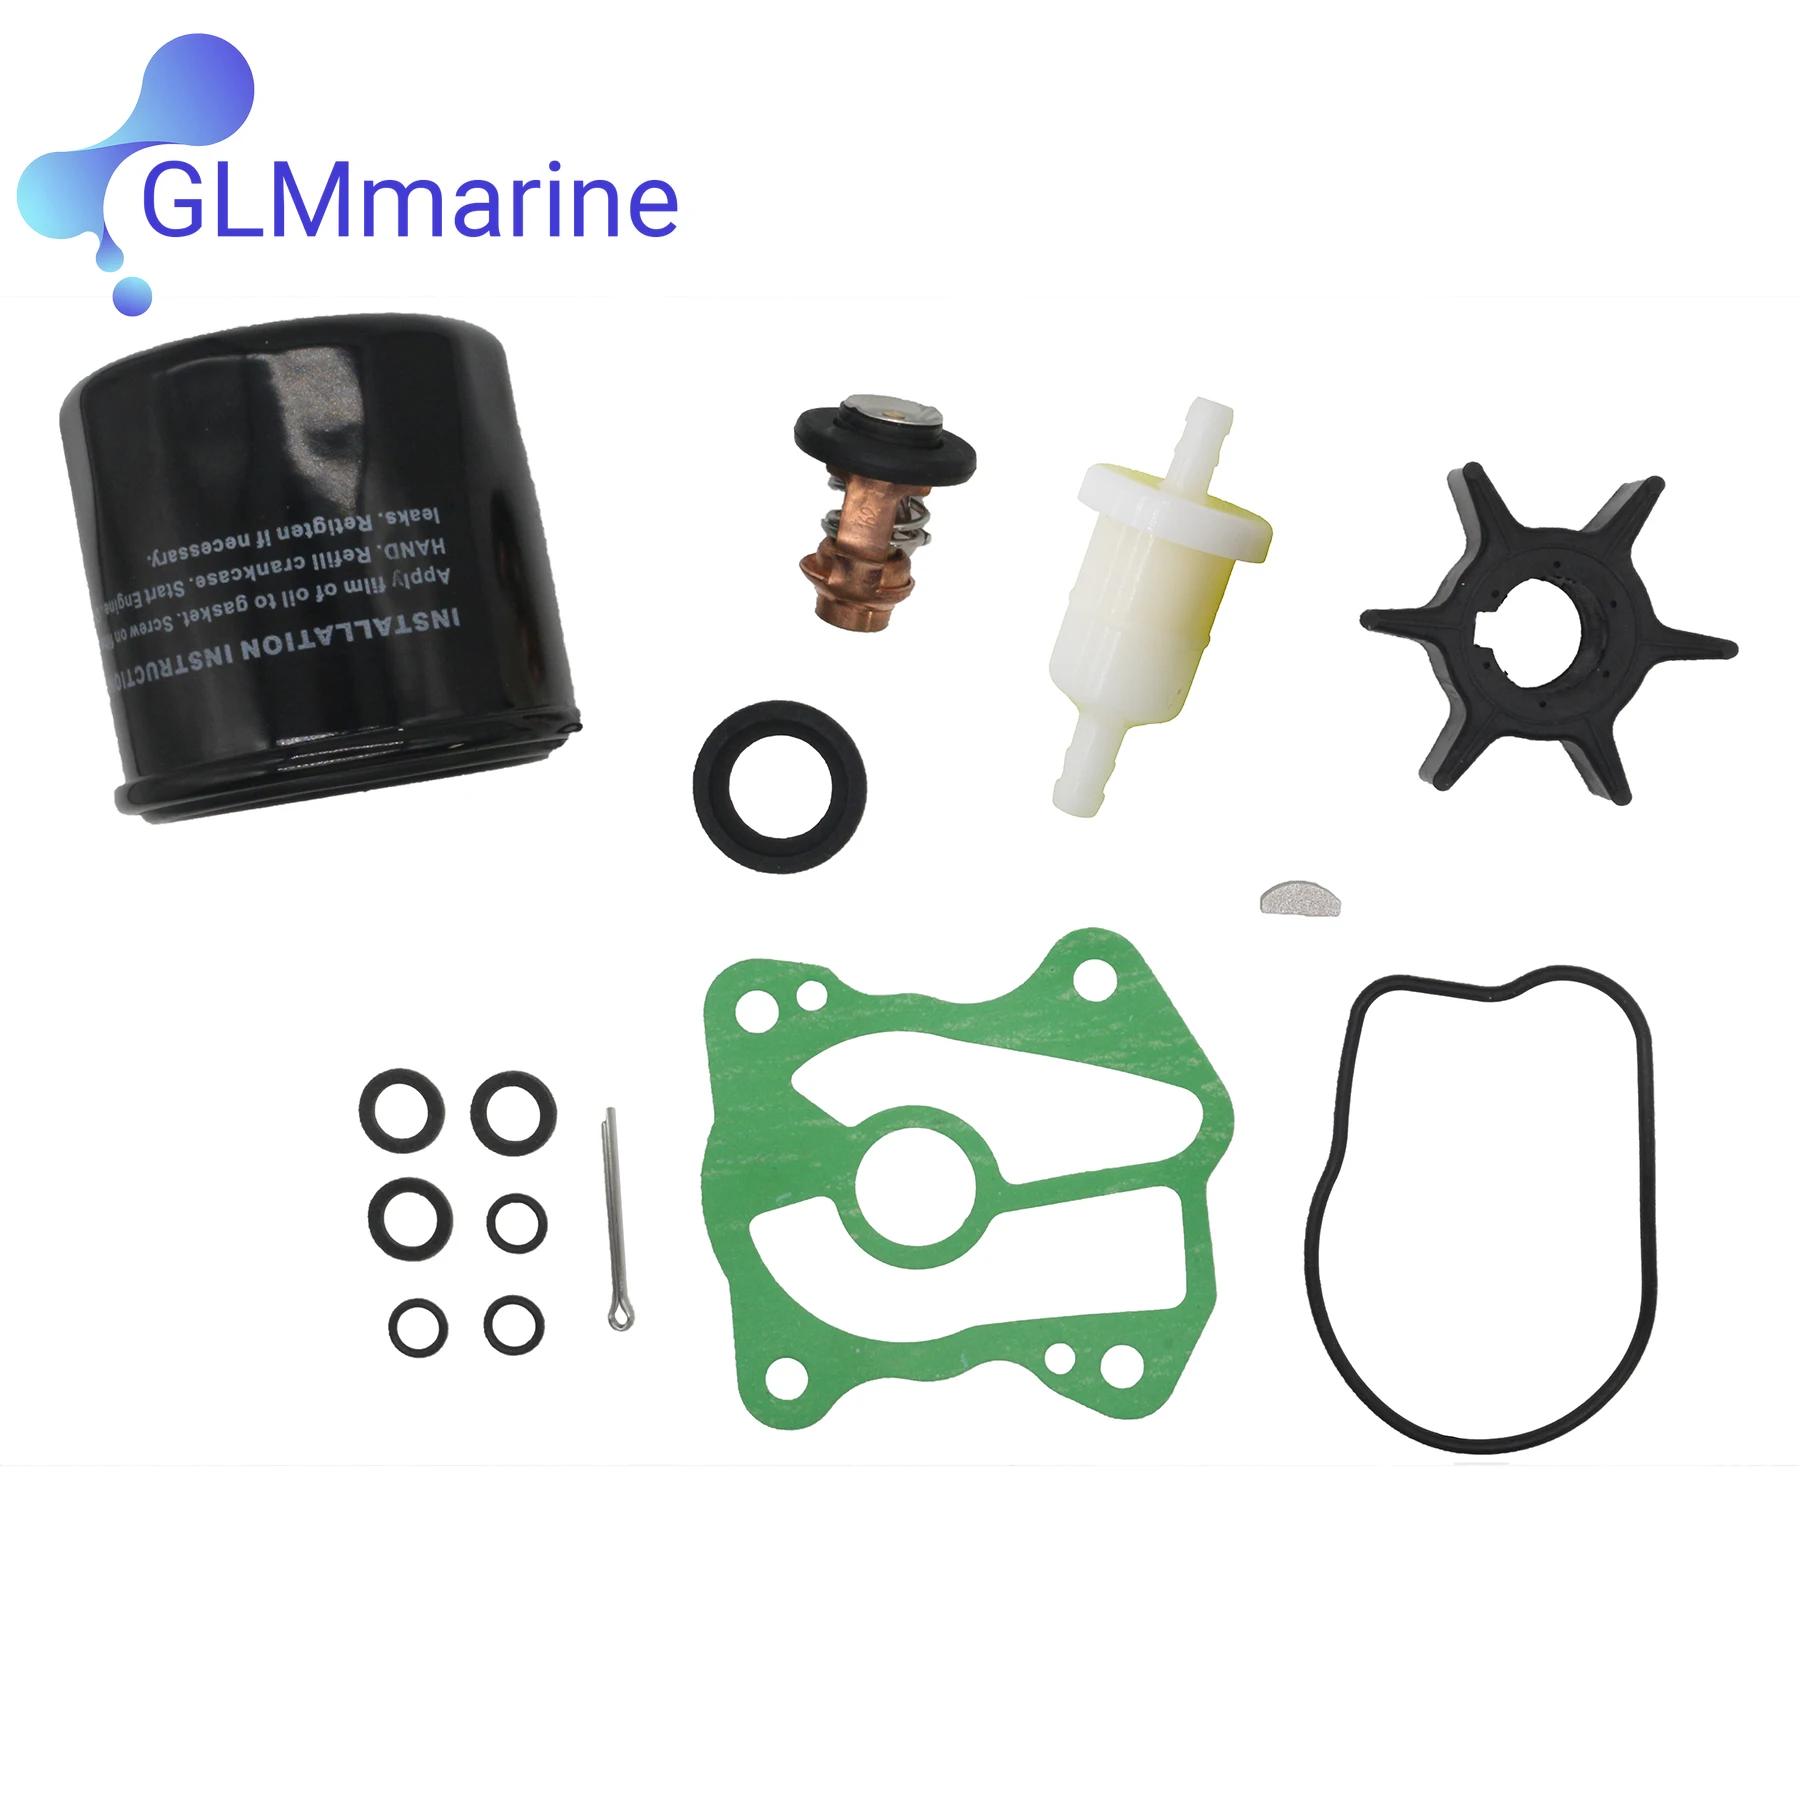 outboard-maintenance-kit-06211-zv7-505-06211zv7505-for-honda-bf-d-series-25-30-hp-outboard-motors